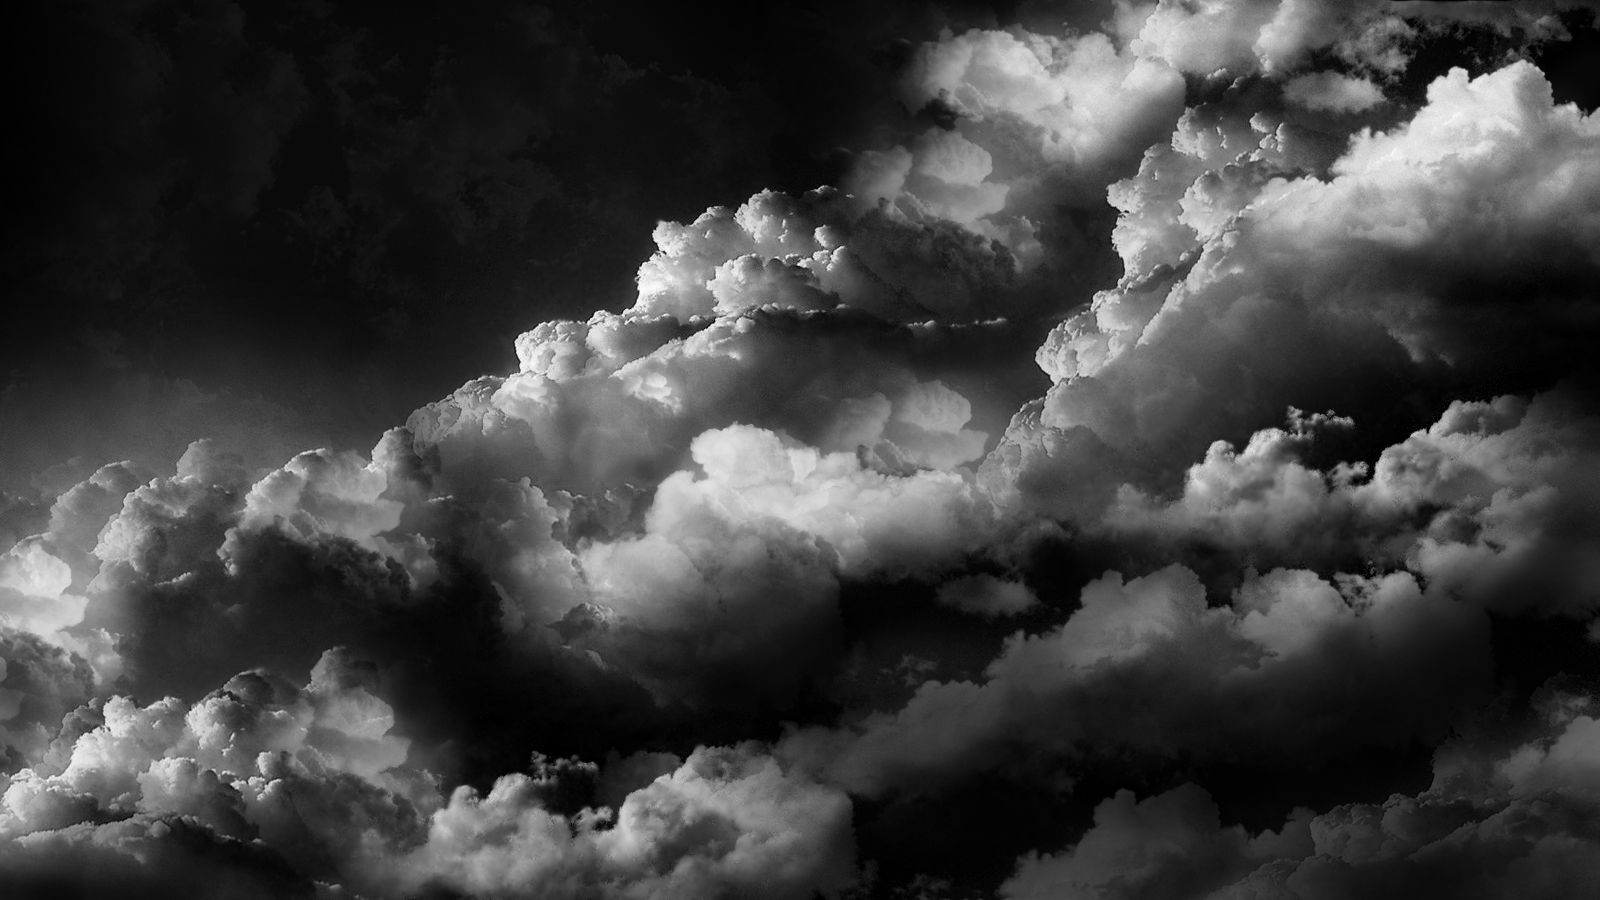 Dark Cloud Hd Wallpapers posted by Ethan Cunningham